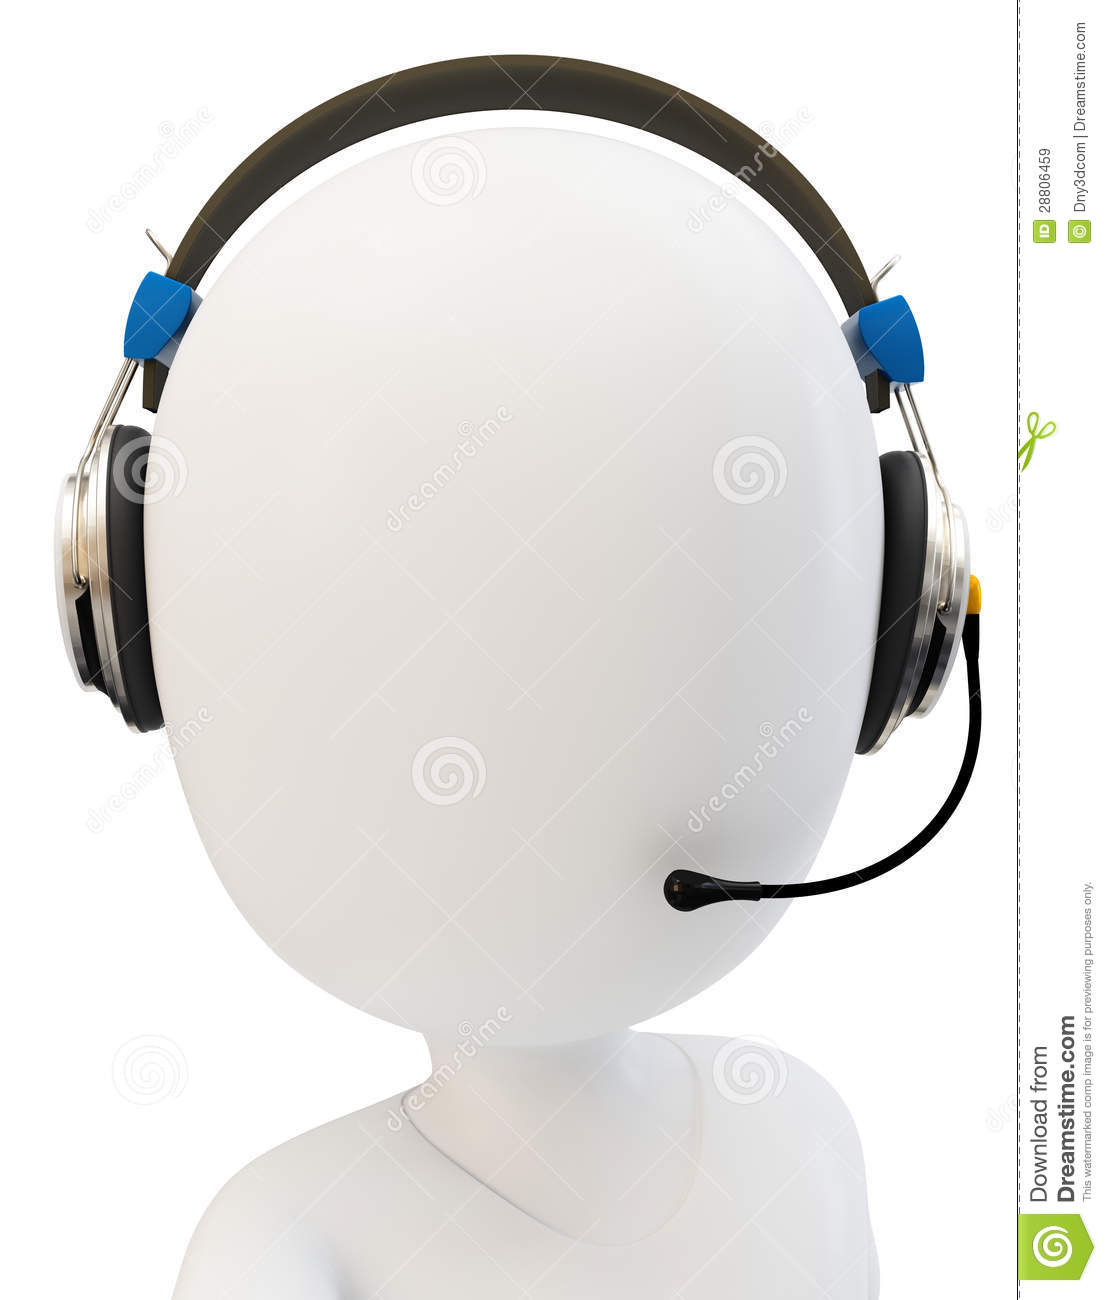 3d Man Call Center Support With Headphones Royalty Free Stock Images